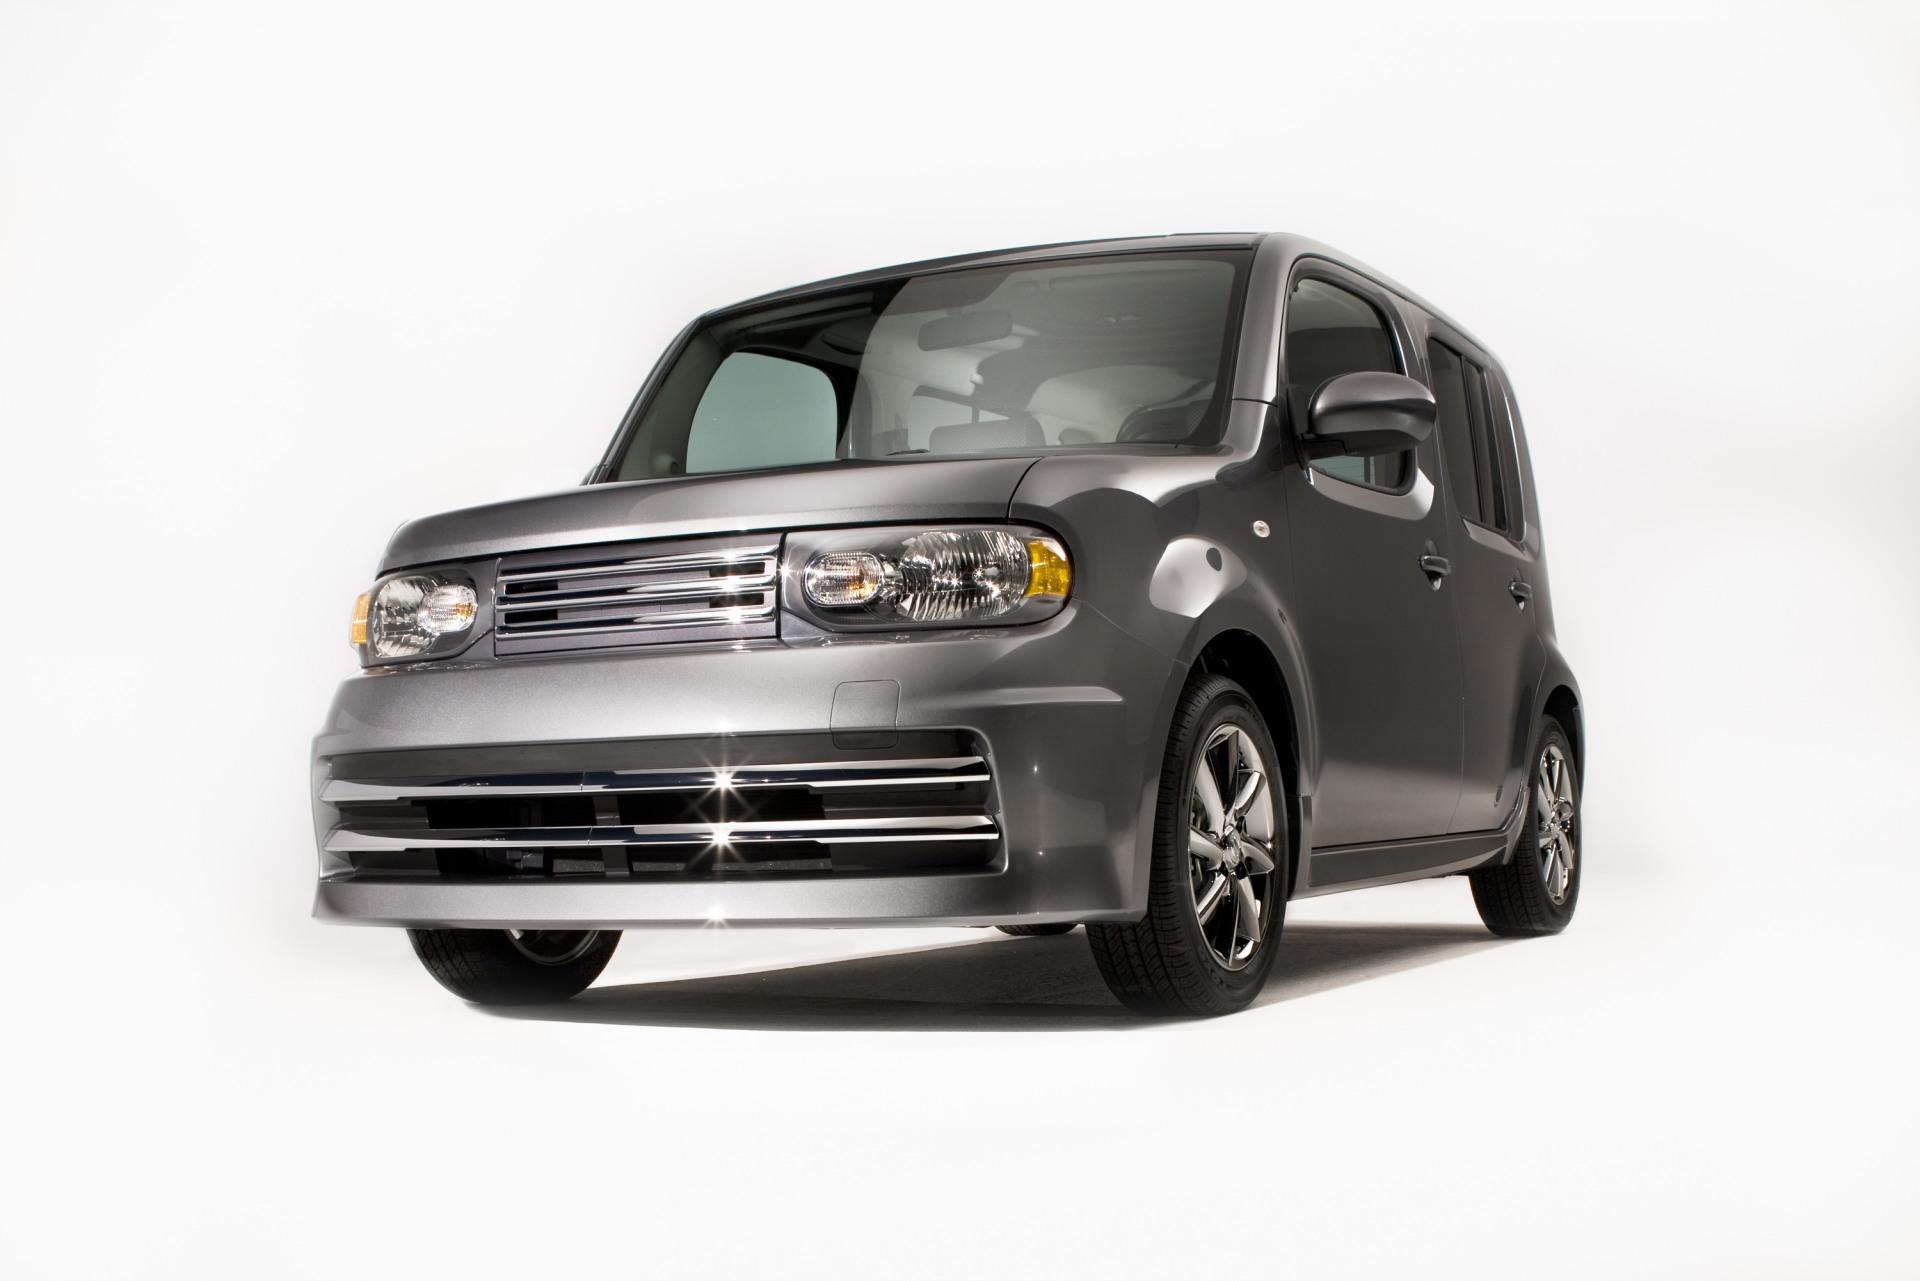 Nissan cube krom wallpaper and image gallery